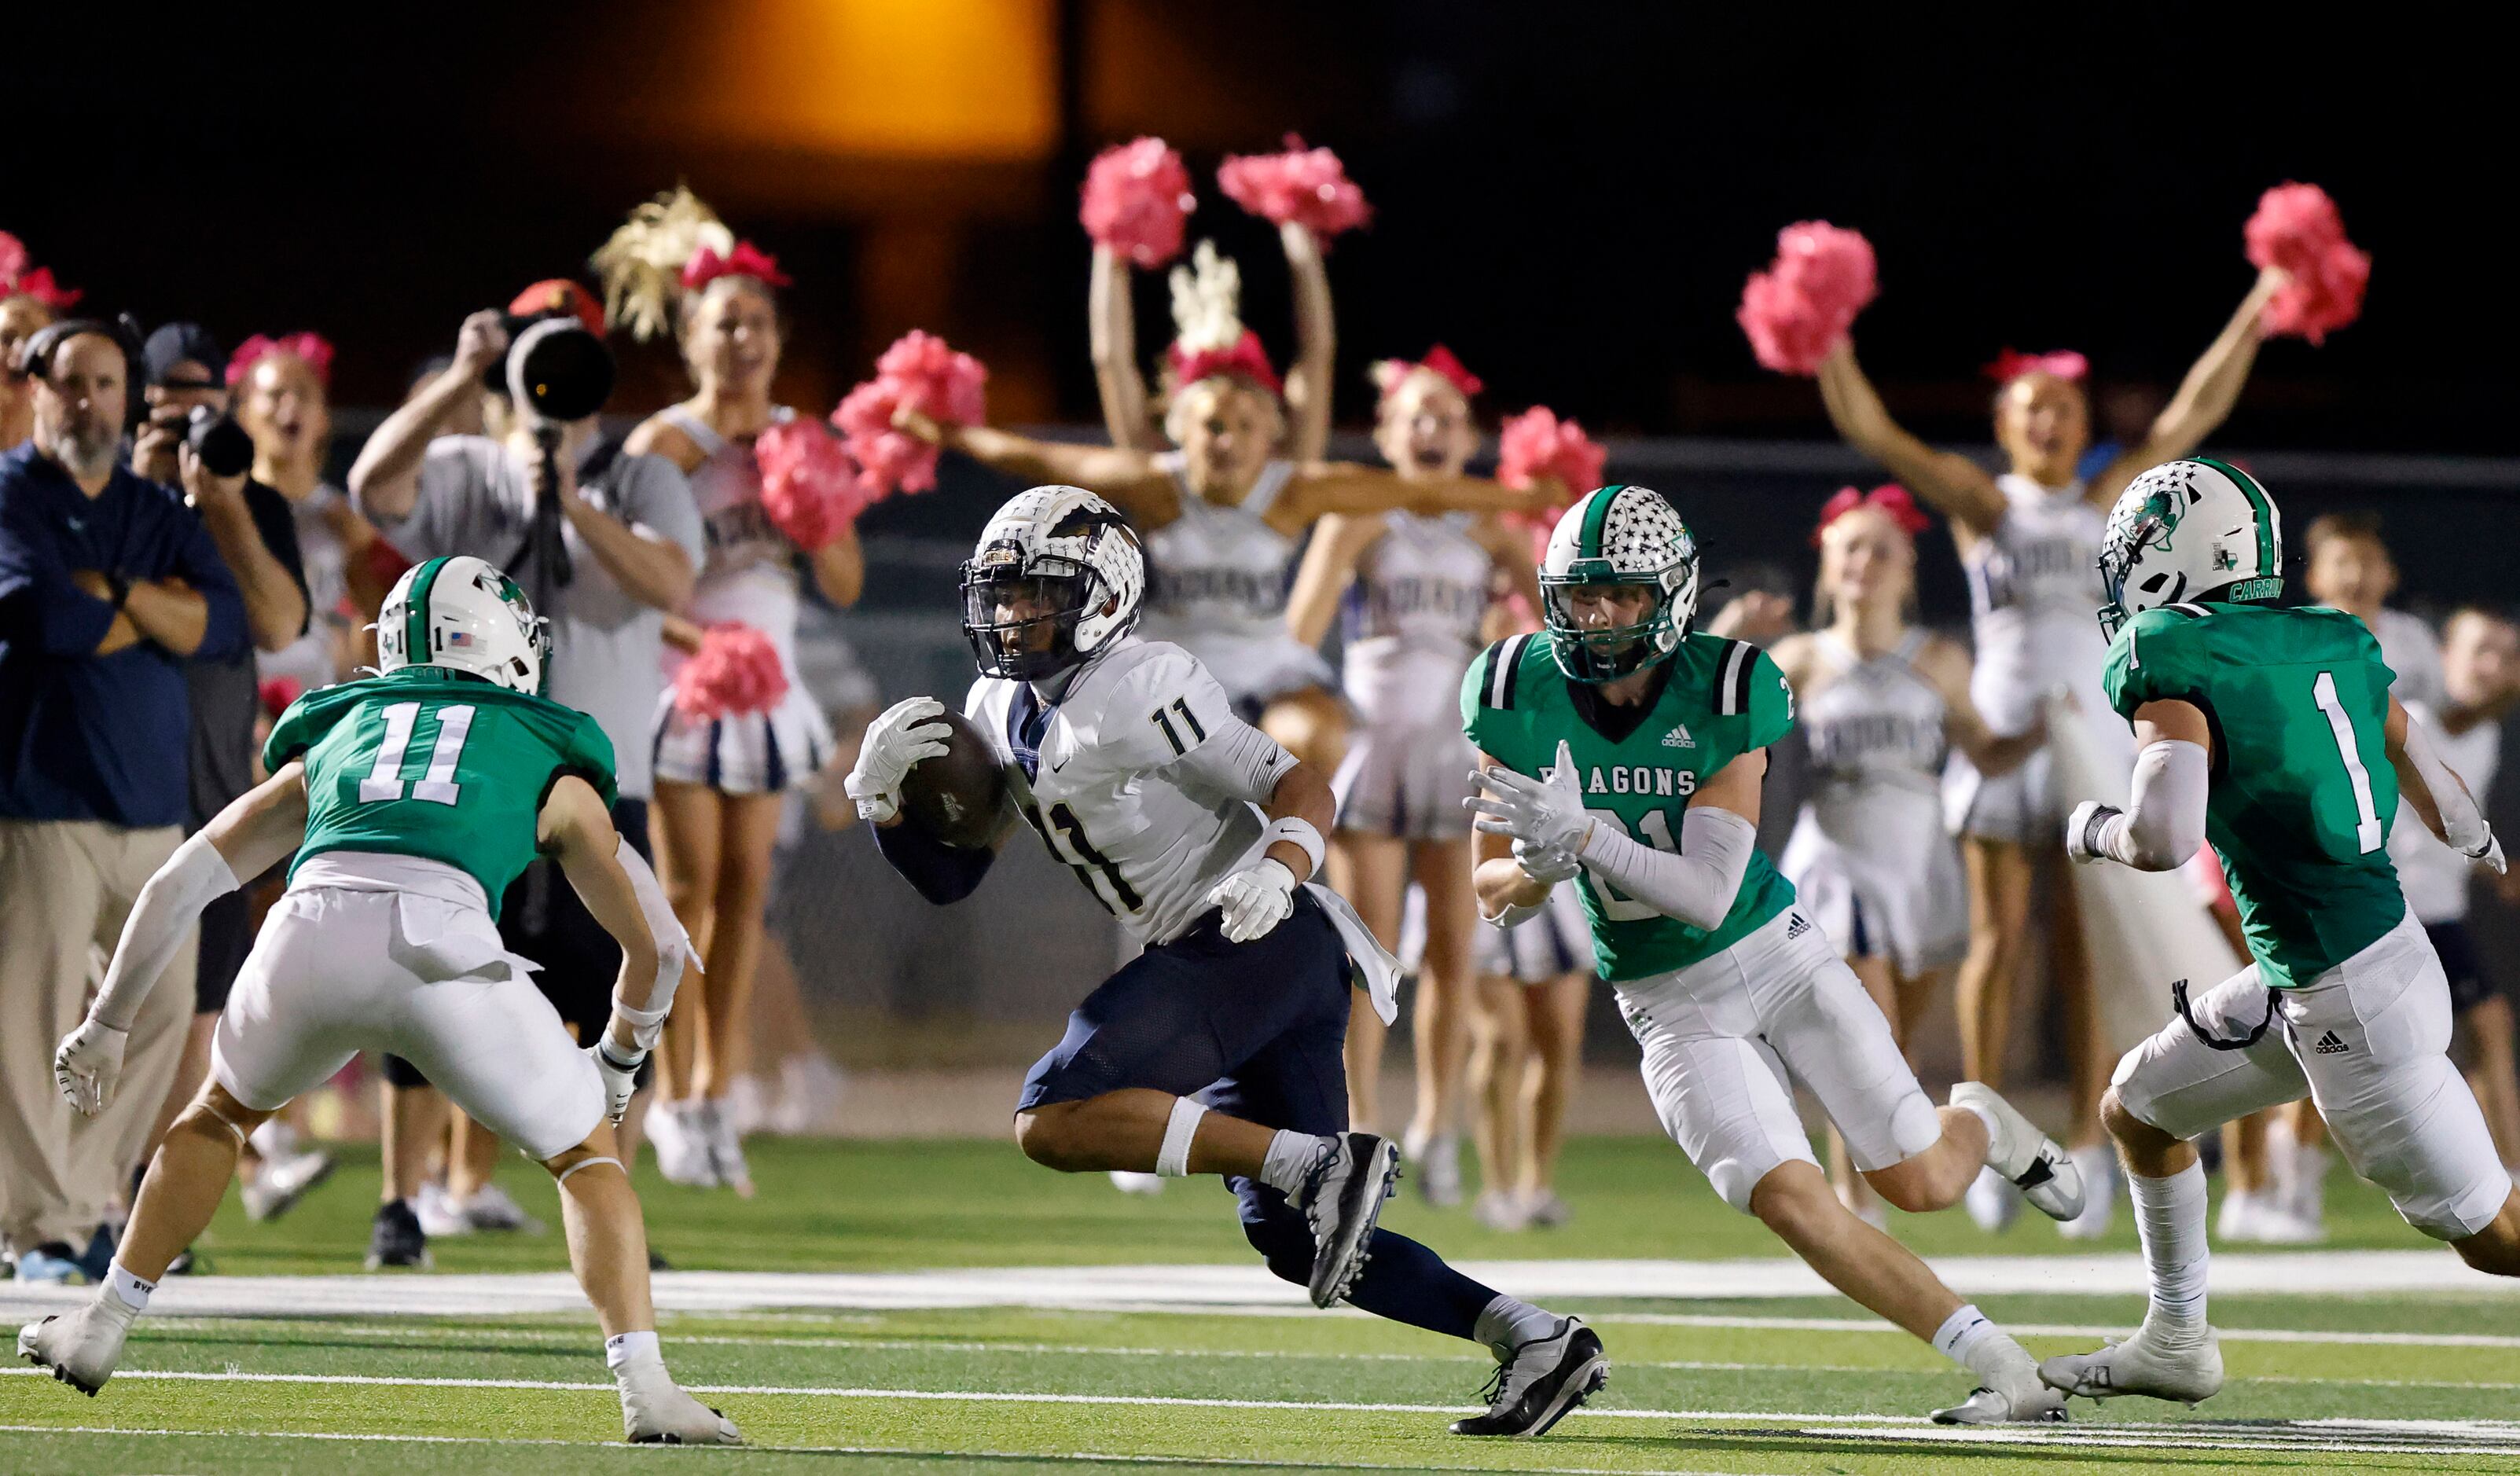 To the delight of the cheerleaders, Keller wide receiver Amarion Henry (11) turns up field...